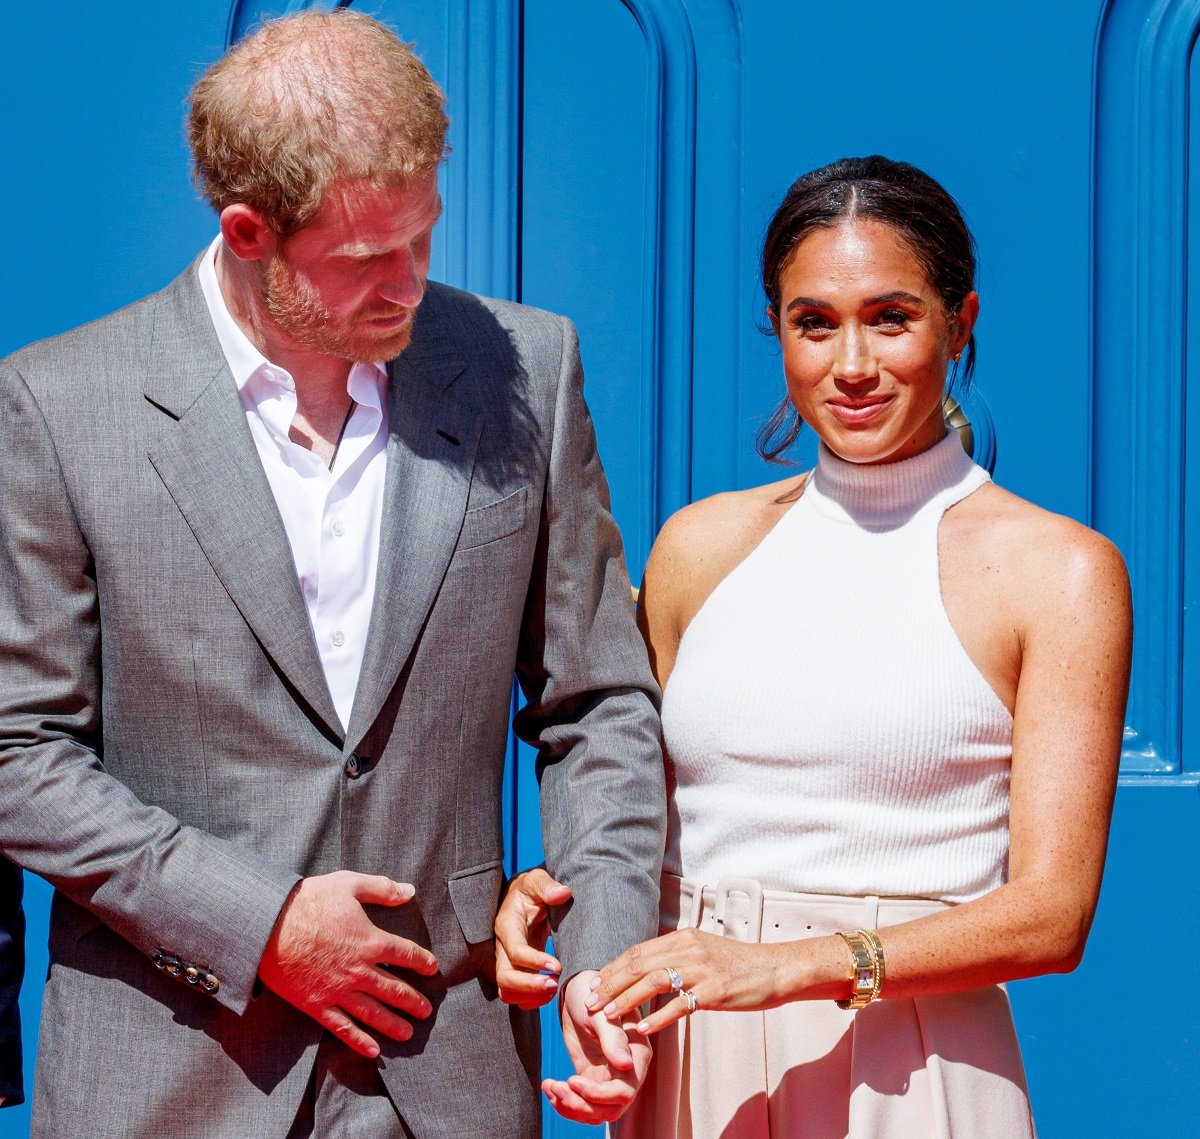 Prince Harry and Meghan Markle, who a body language expert says displayed a subtle gesture showing a change in their relationship now, visit the city hall during the Invictus Games Dusseldorf 2023